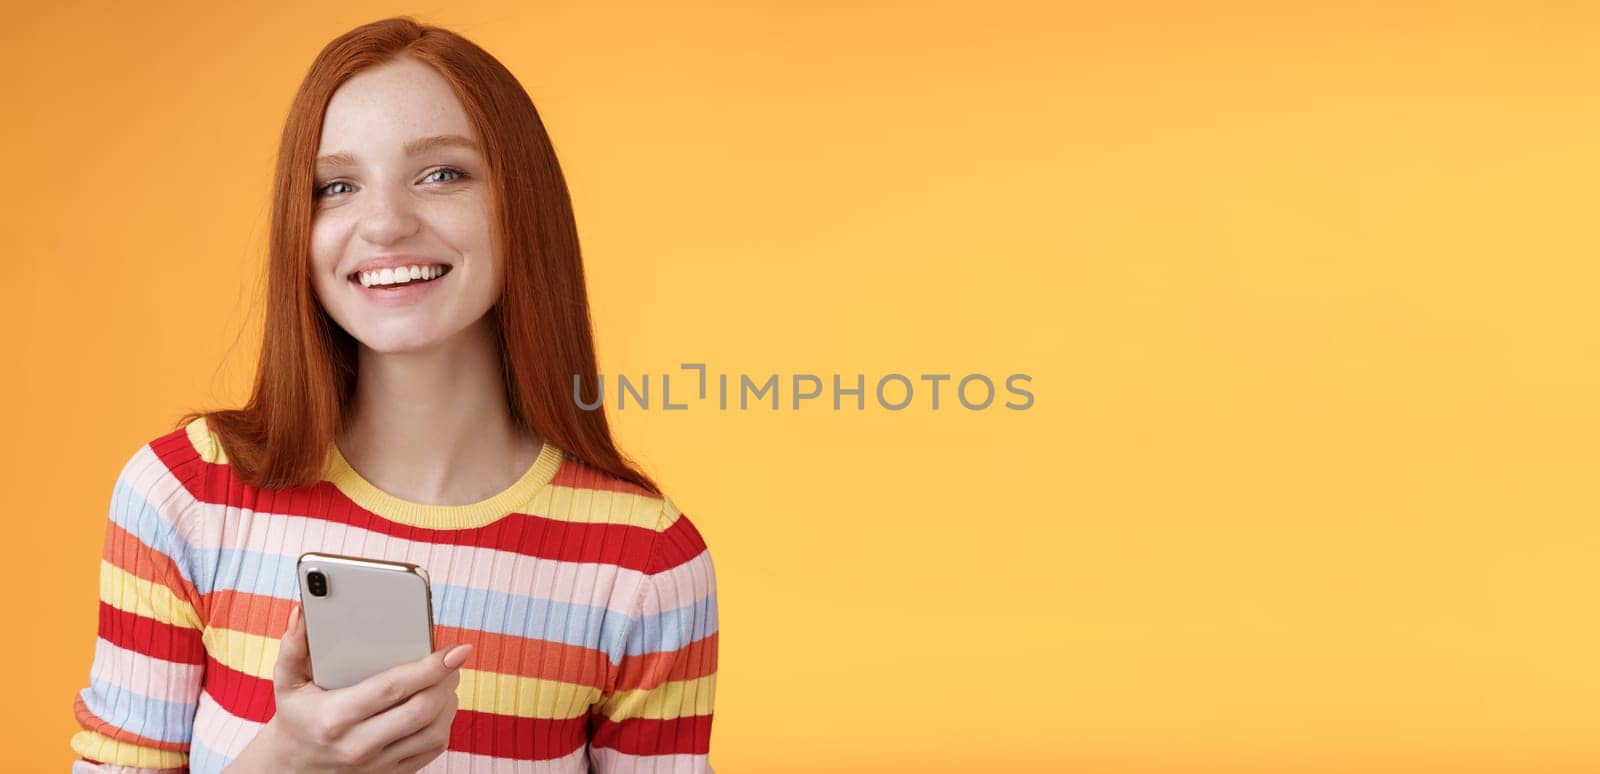 Friendly enthusiastic young redhead girl blue eyes using smartphone turn camera answer smiling broadly telling who sent message standing delighted orange background messaging, texting boyfriend.